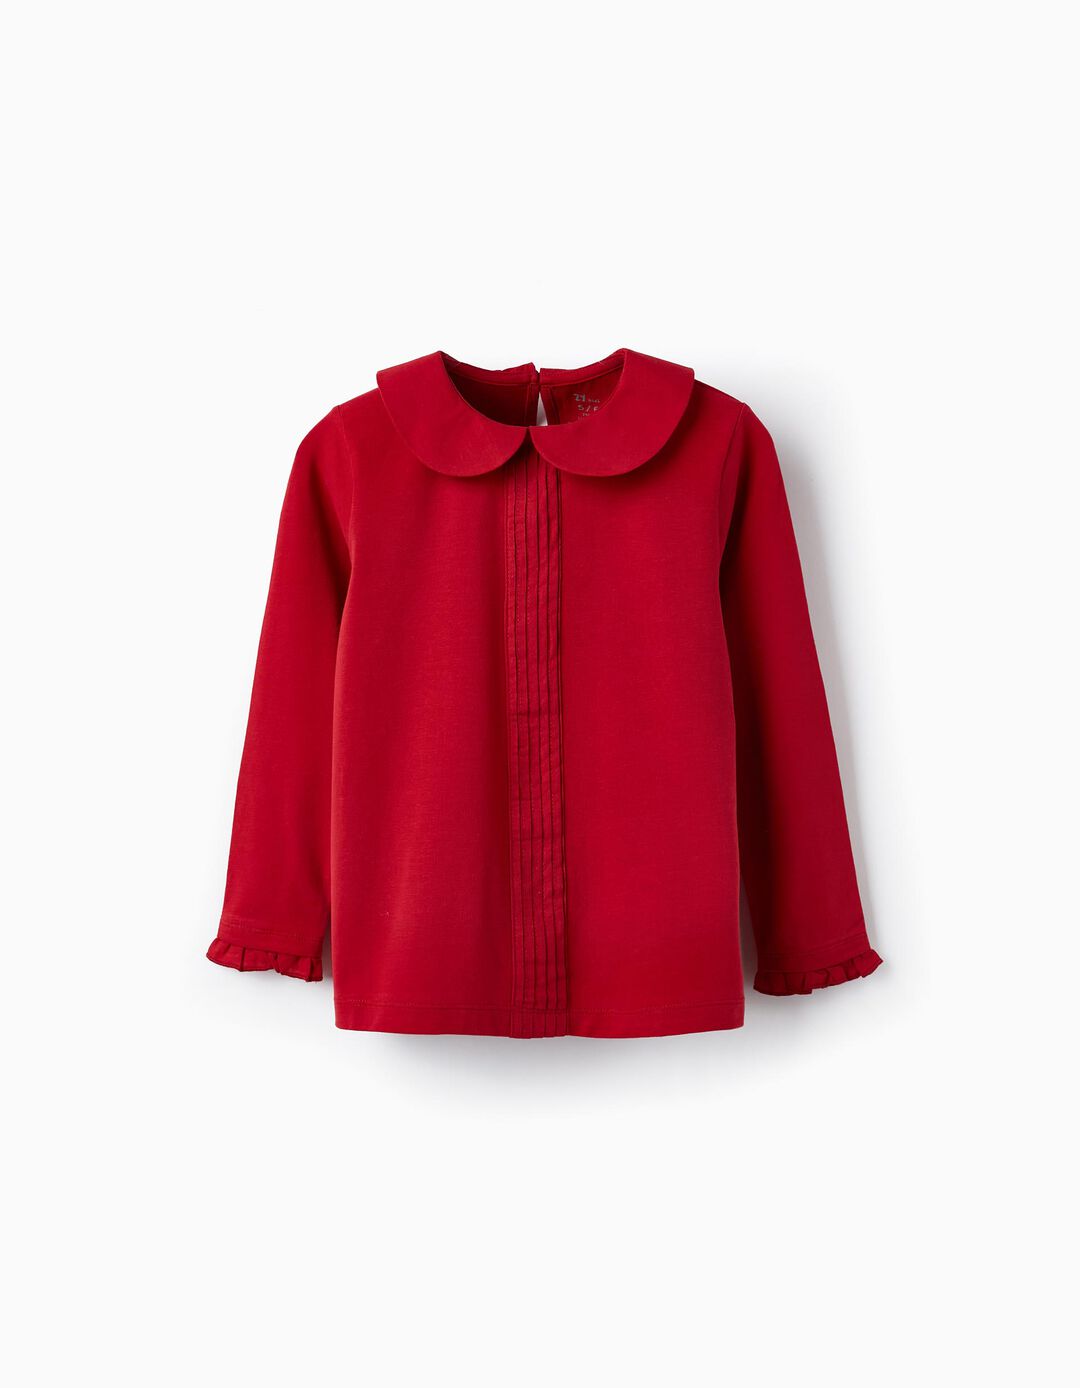 Long Sleeve Cotton T-Shirt with Ruffles for Girls, Red